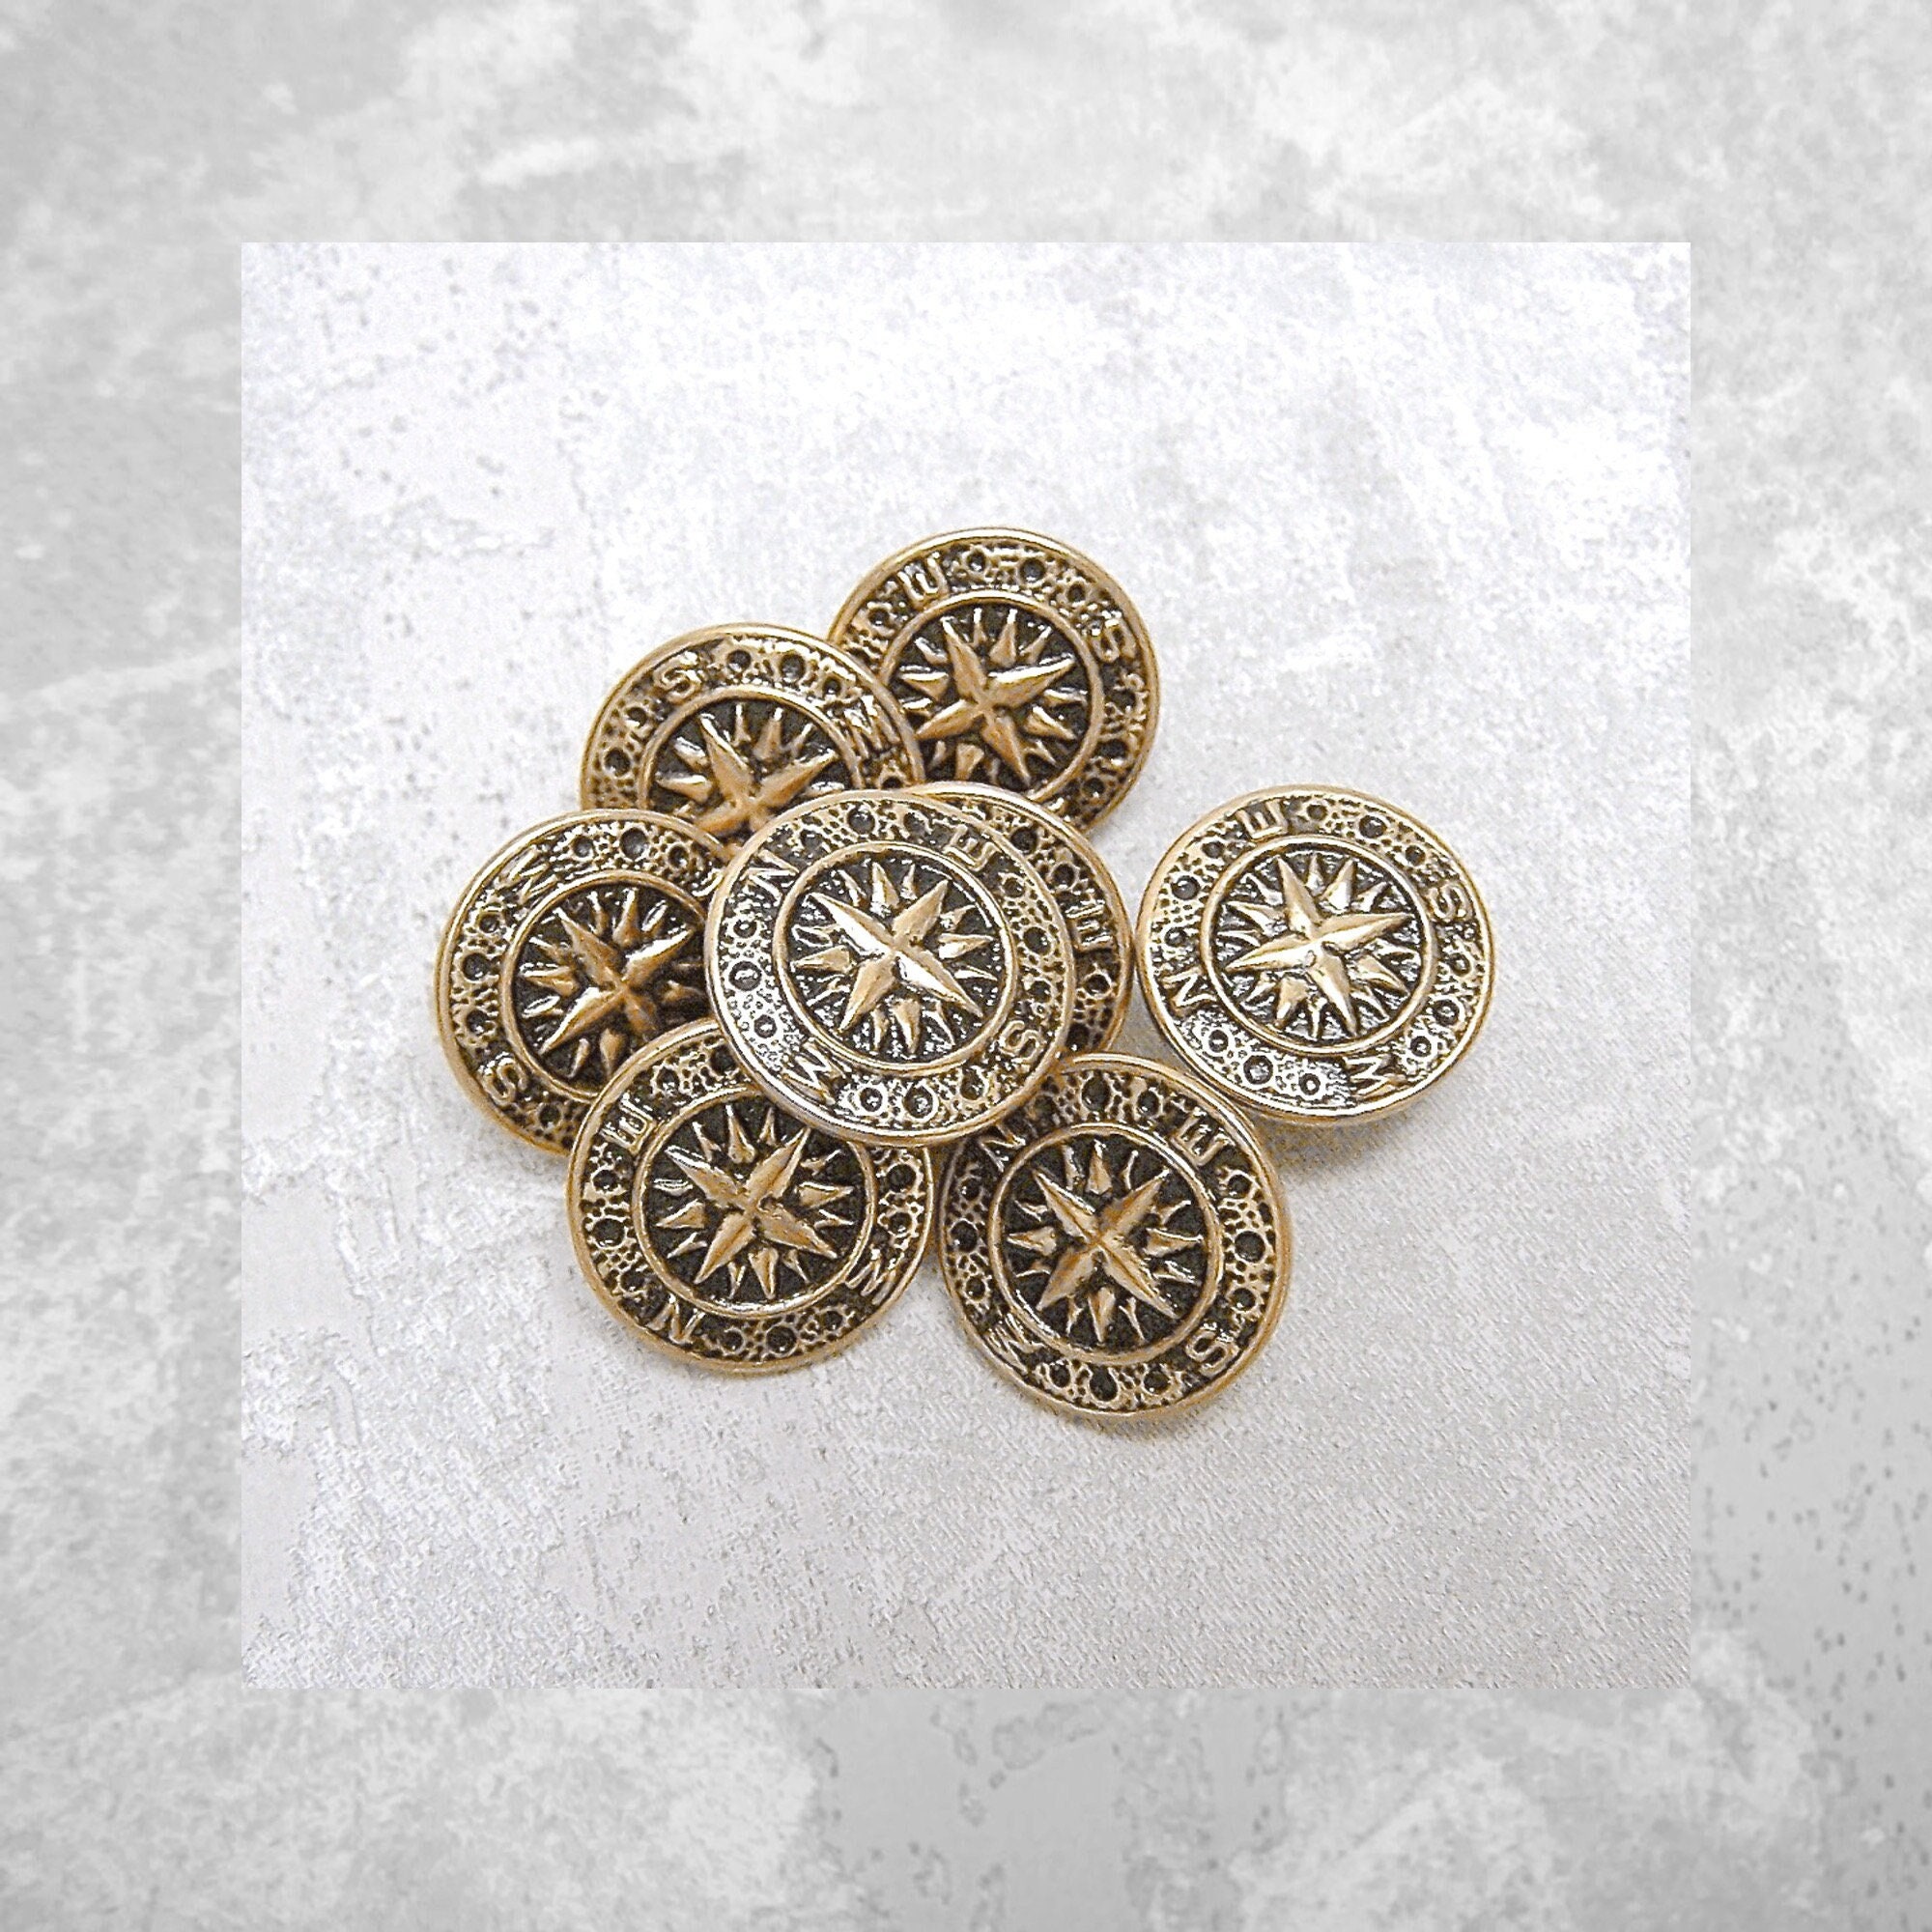 Rustic unfinished wood button set of 36 small buttons 13mm